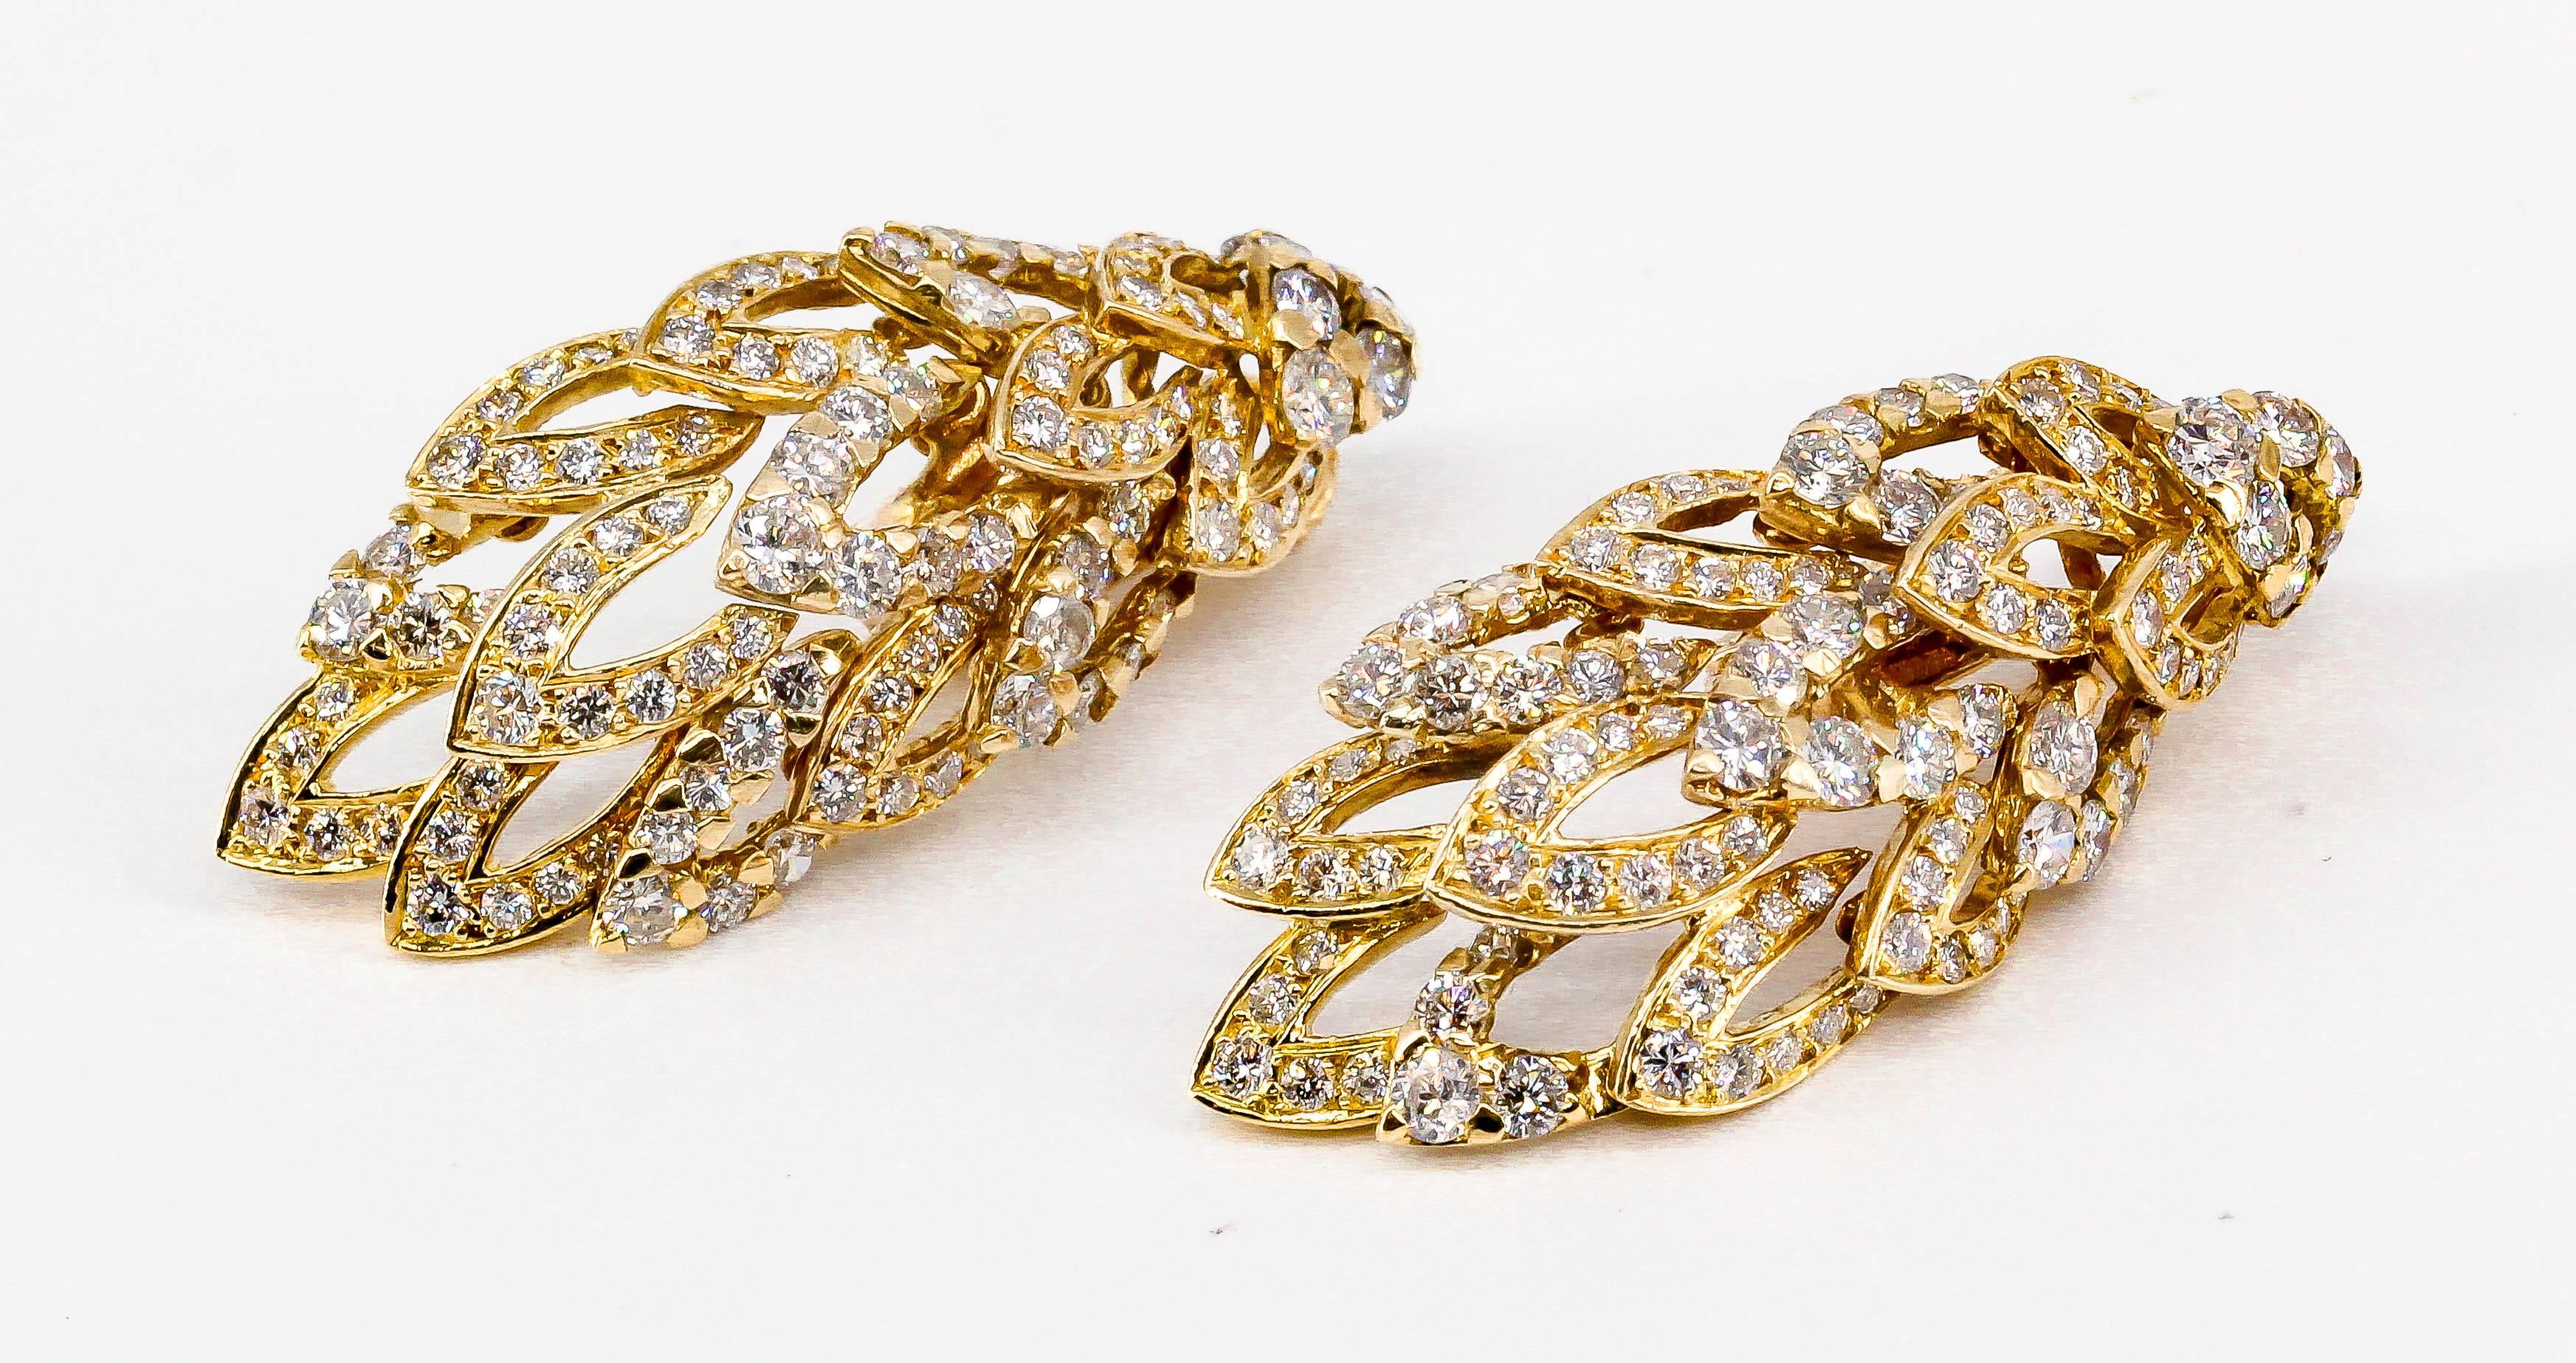 Elegant diamond and 18K yellow gold earrings by Chaumet. They are made in the likeness of wings, with flexible moving parts. Diamonds are high grade round brilliant cut, approx. 5-6 carats total weight,  over a yellow 18K gold setting. 

Hallmarks: